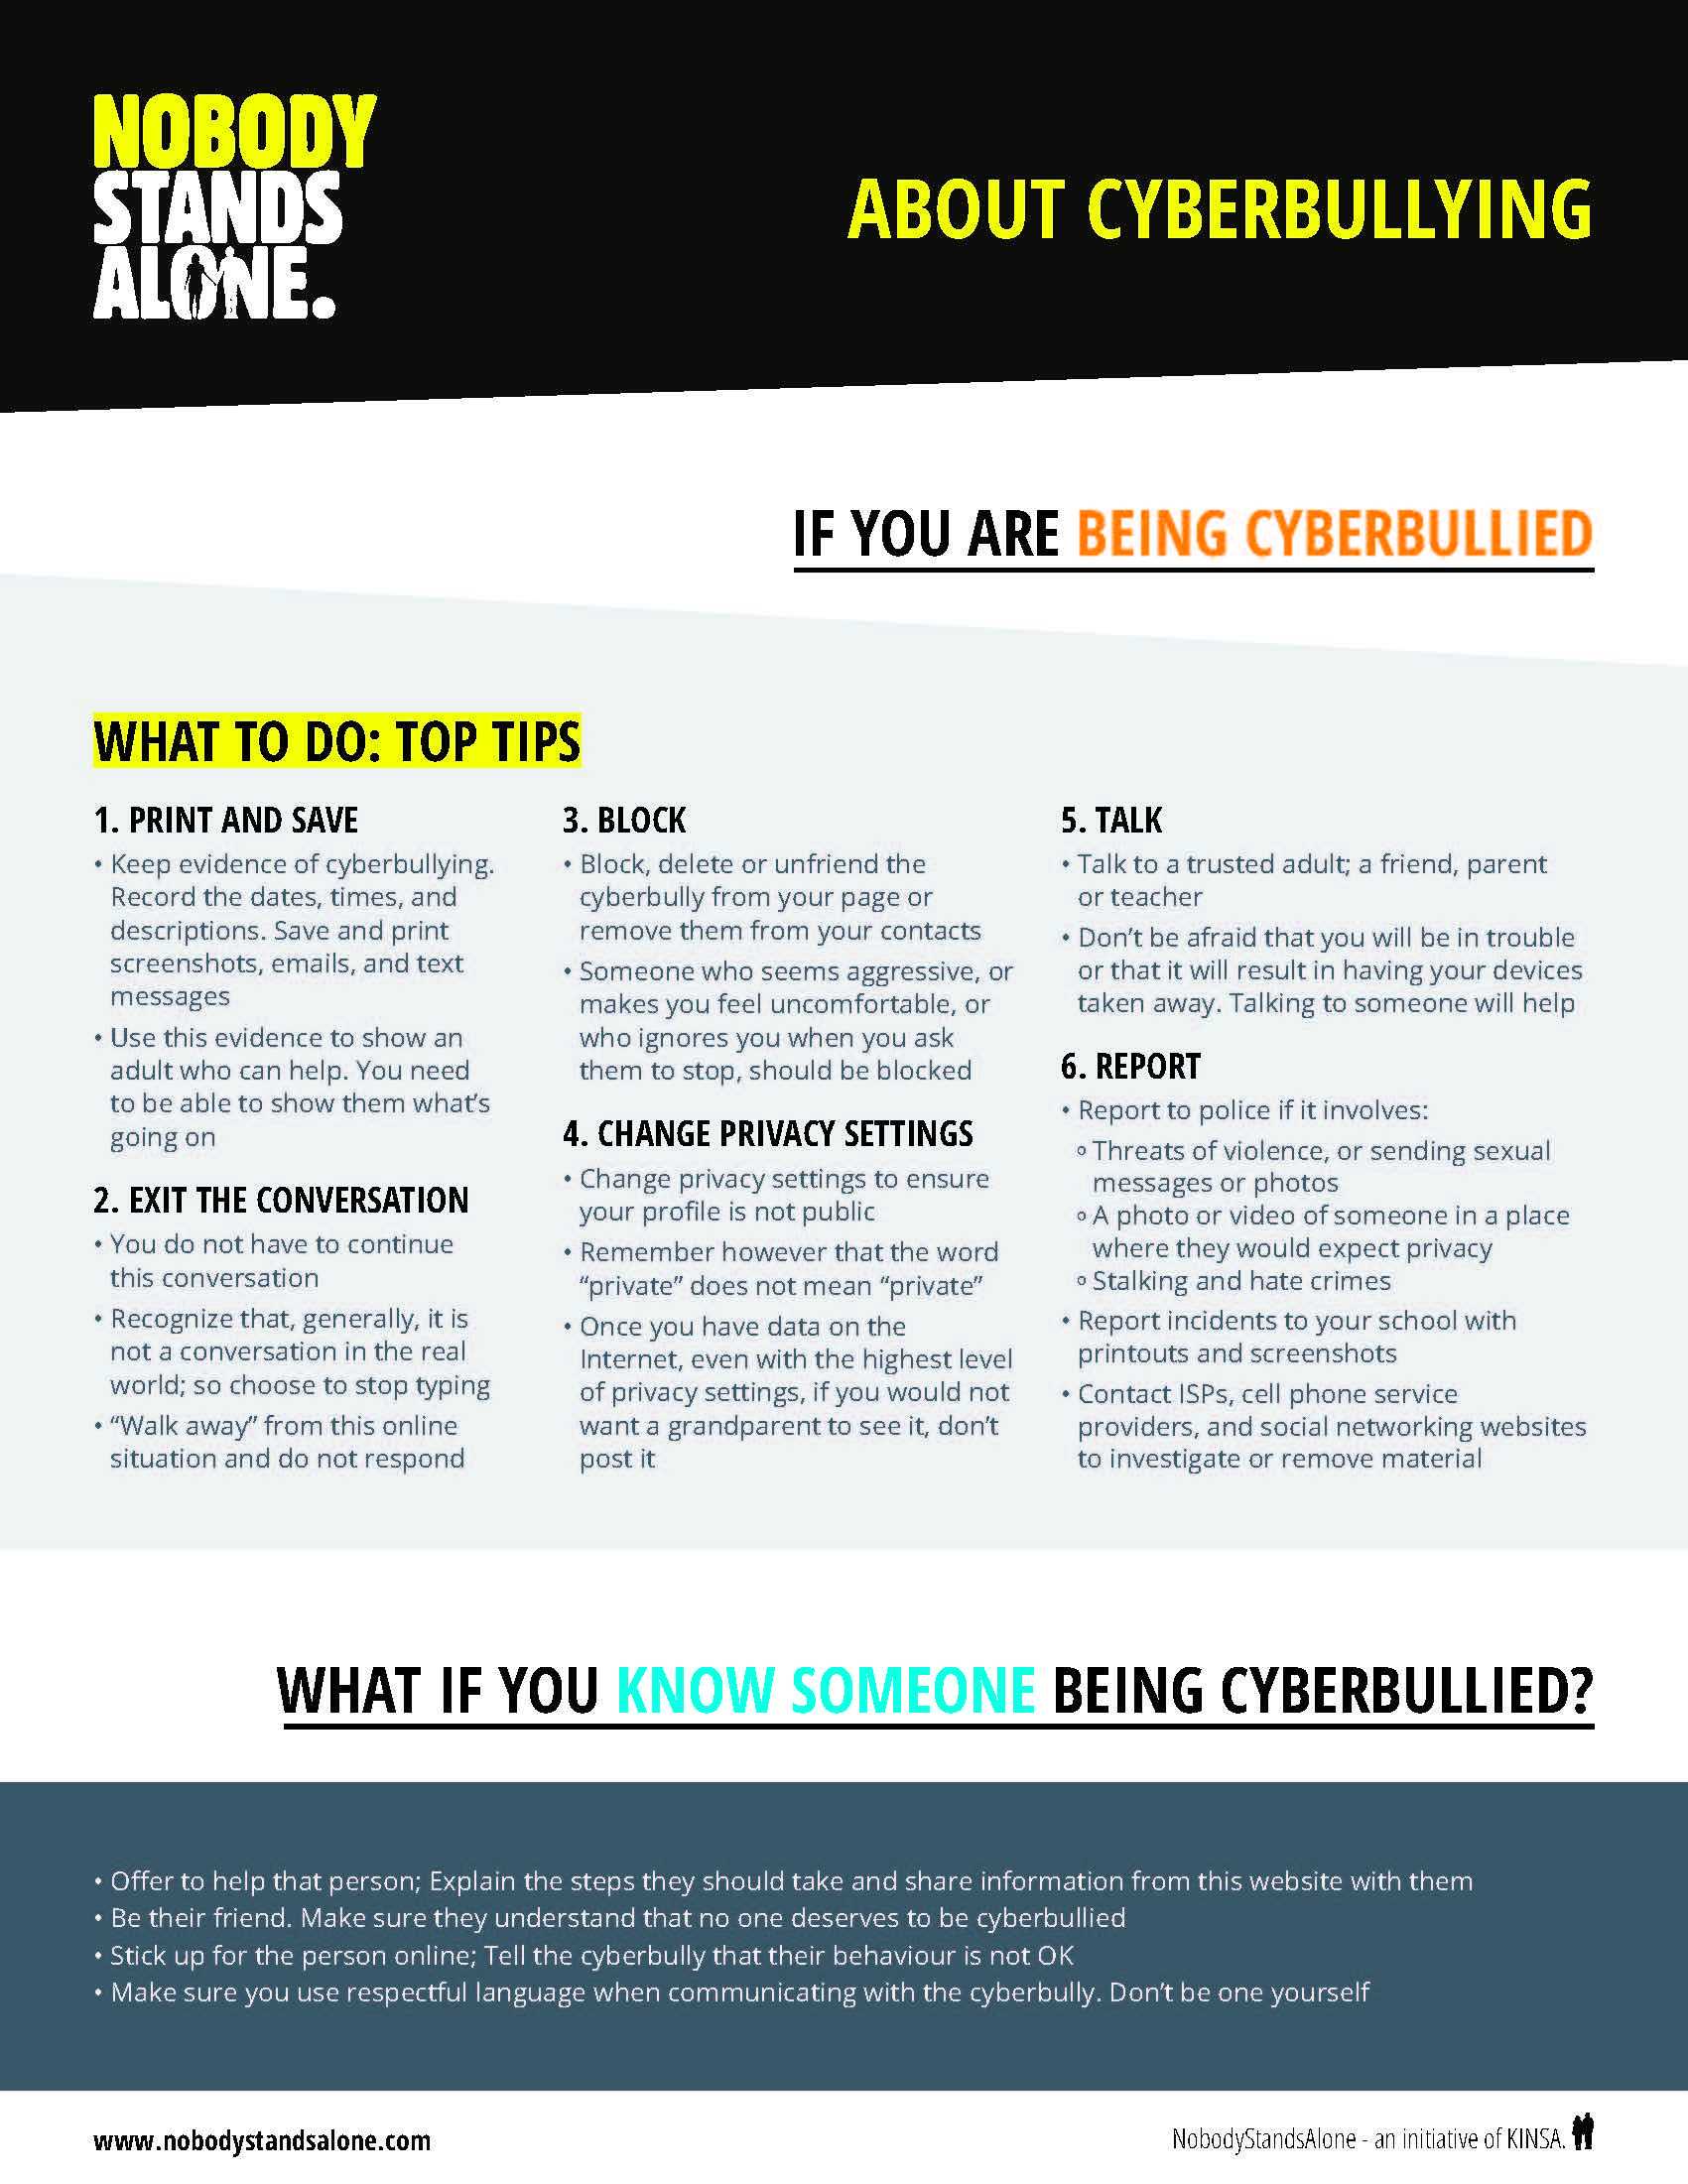 Citizenship In the World Worksheet as Well as P1 Of 2 Of Our Teens What to Do About Cyberbullying Info Sheet to